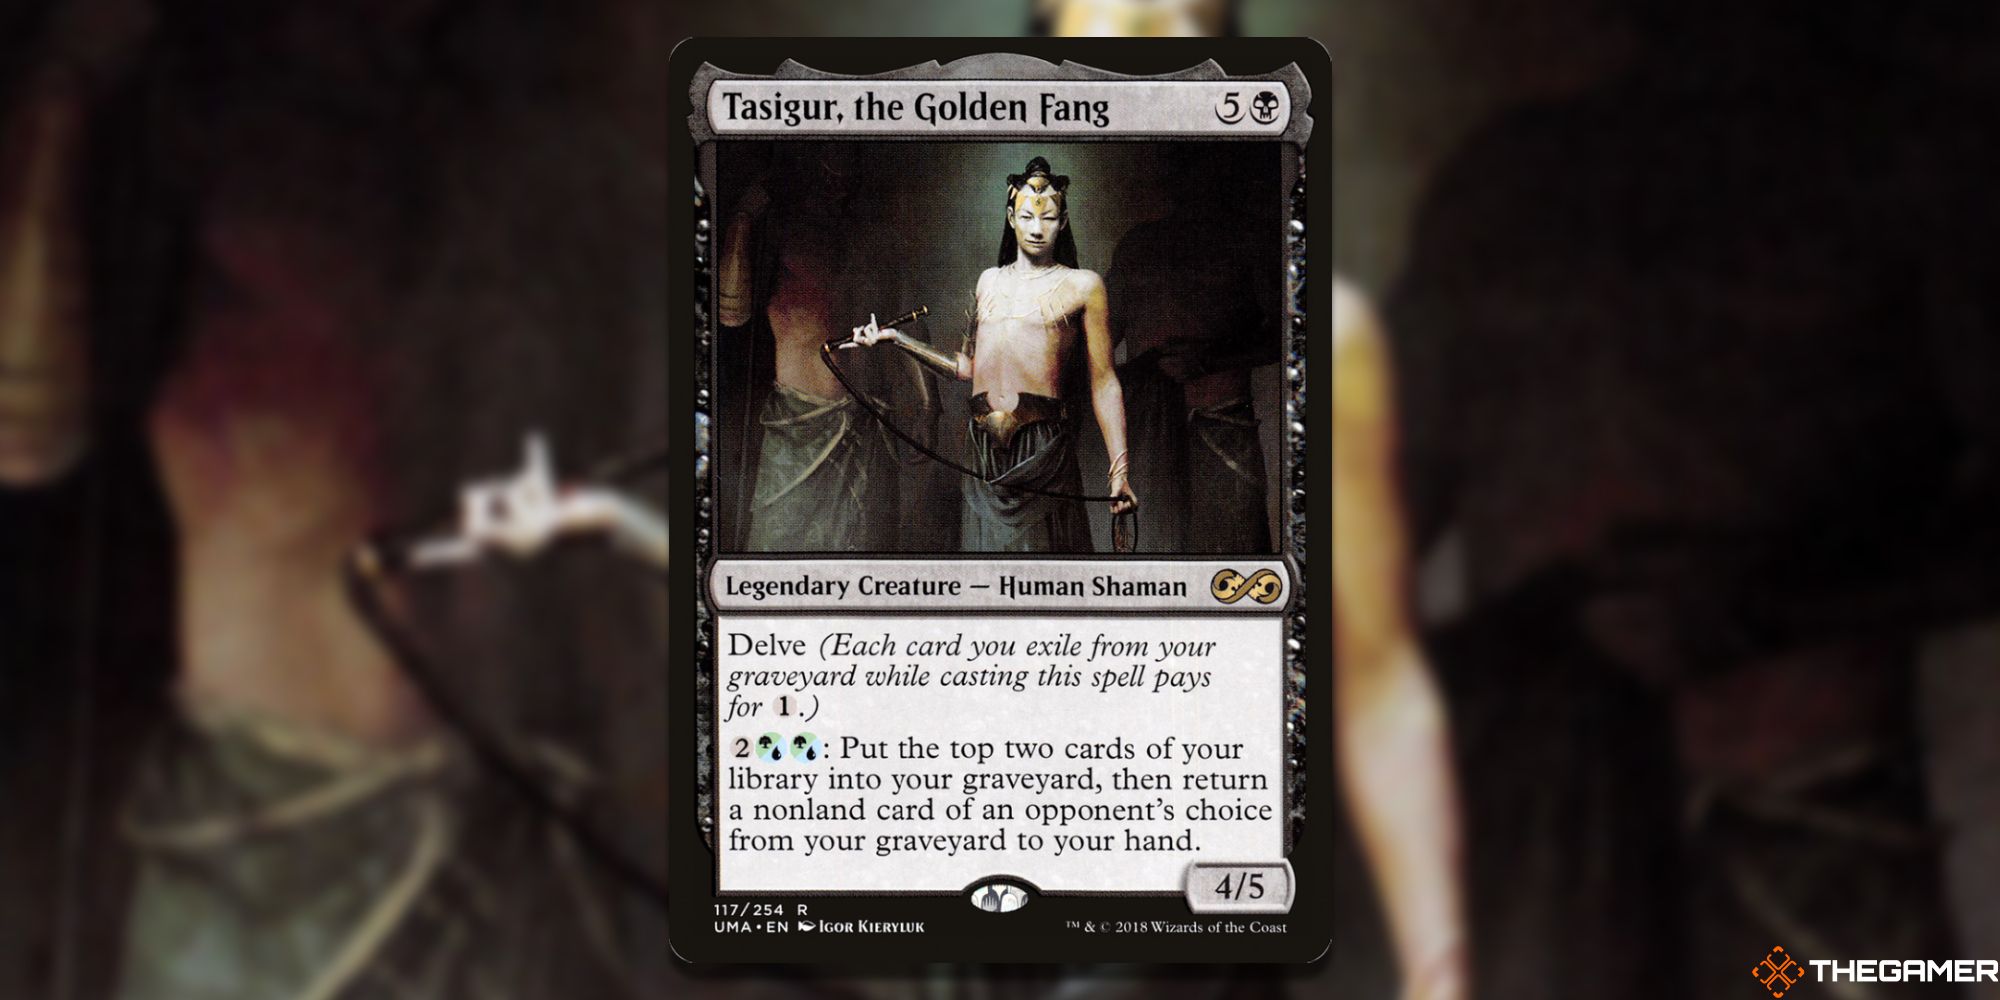 Image of the Tasigur, The Golden Fang card in Magic: The Gathering, with art by Igor Kieryluk